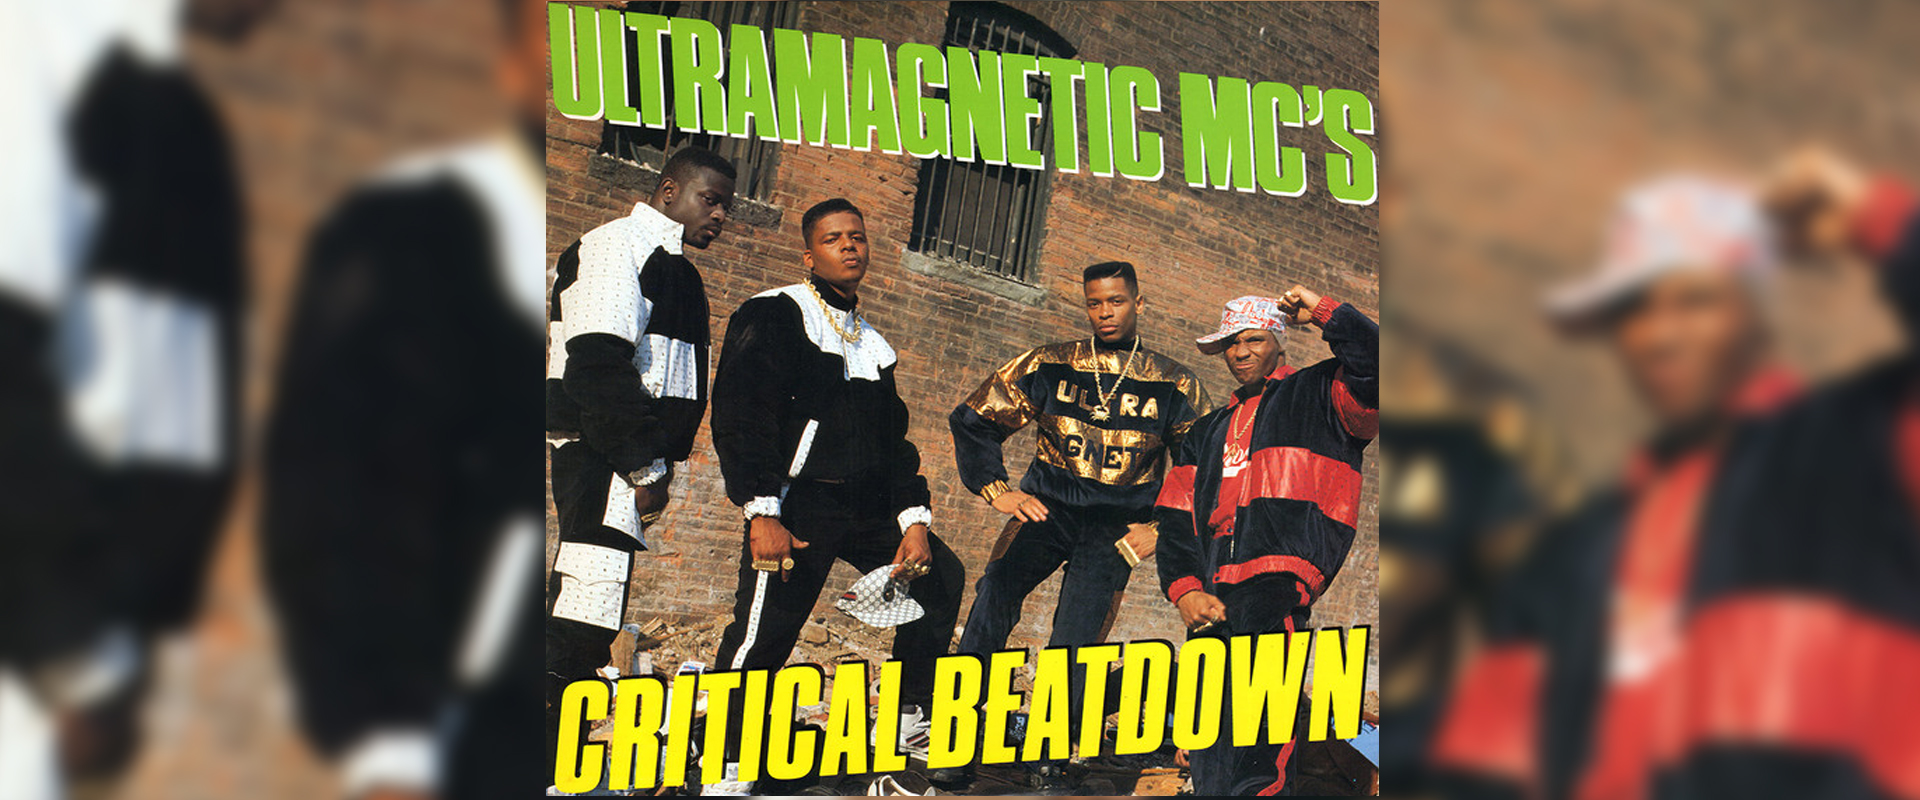 Critical Beatdown' By The Ultramagnetic MC's At 35